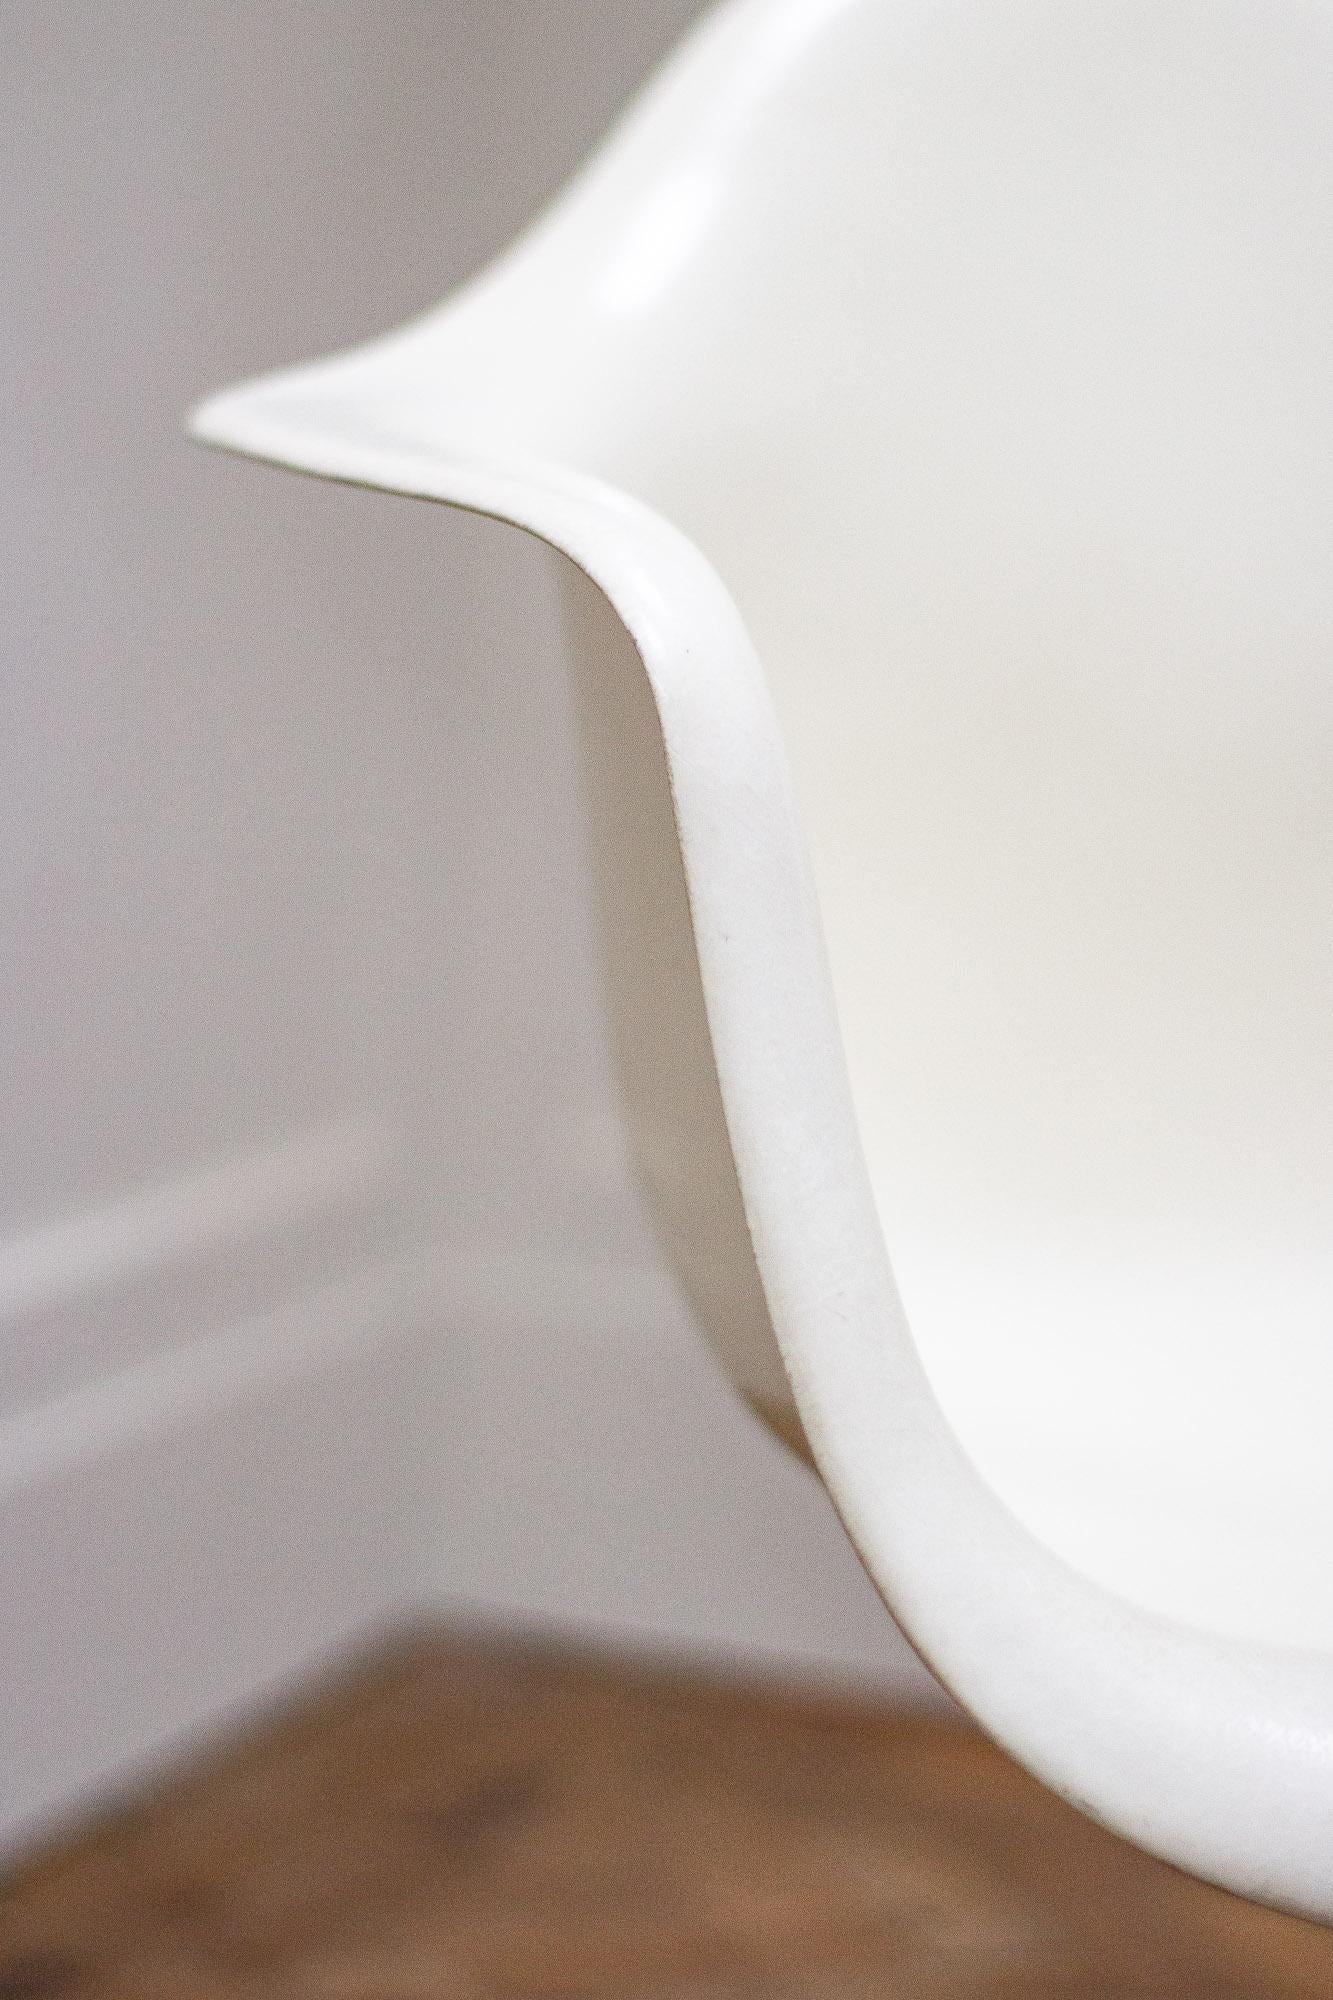 Late 20th Century Original Charles and Ray Eames Fibreglass Shell Chair, White